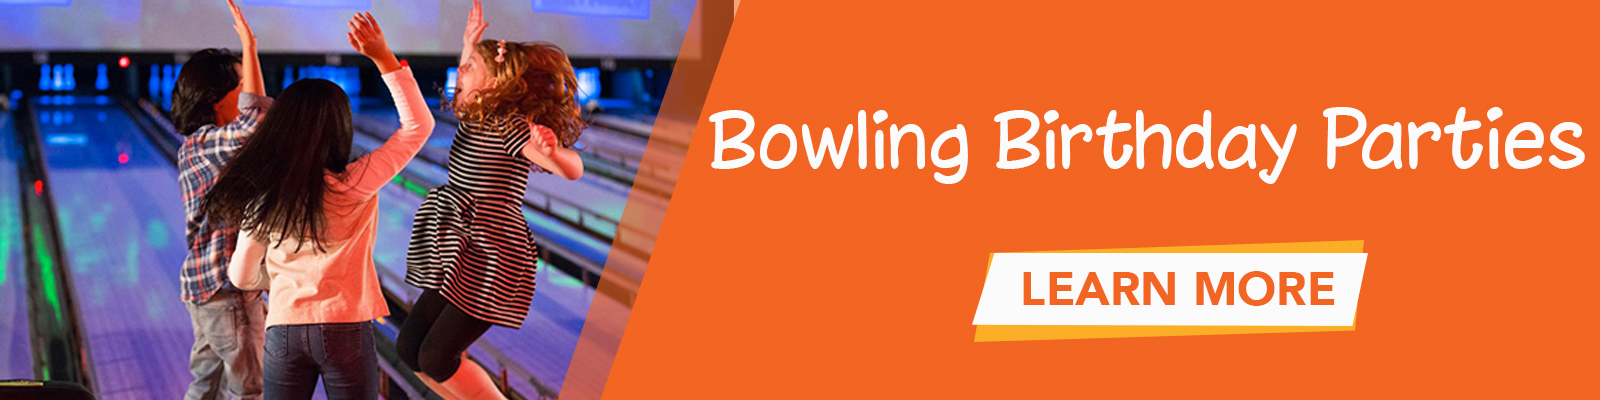 Click to learn more about bowling birthday parties